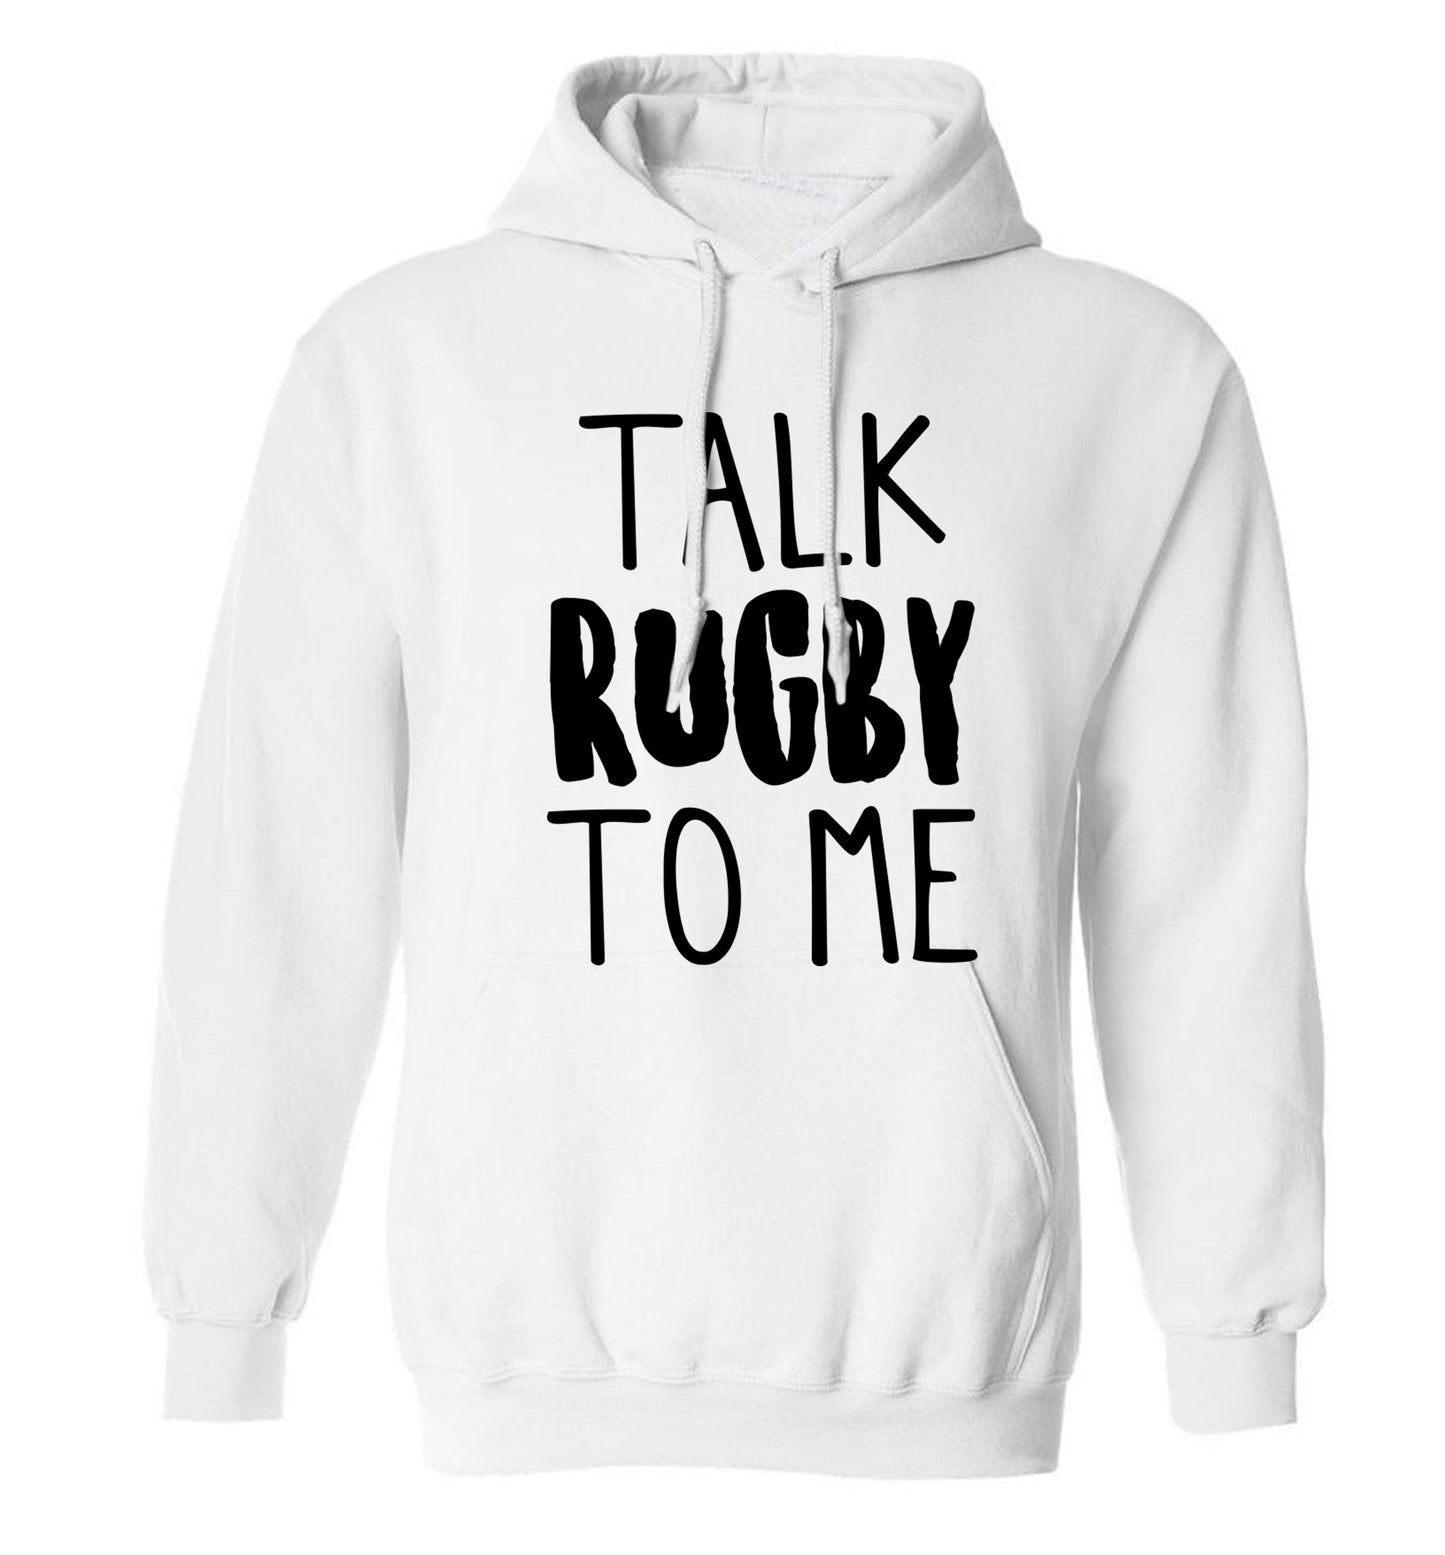 Talk rugby to me adults unisex white hoodie 2XL